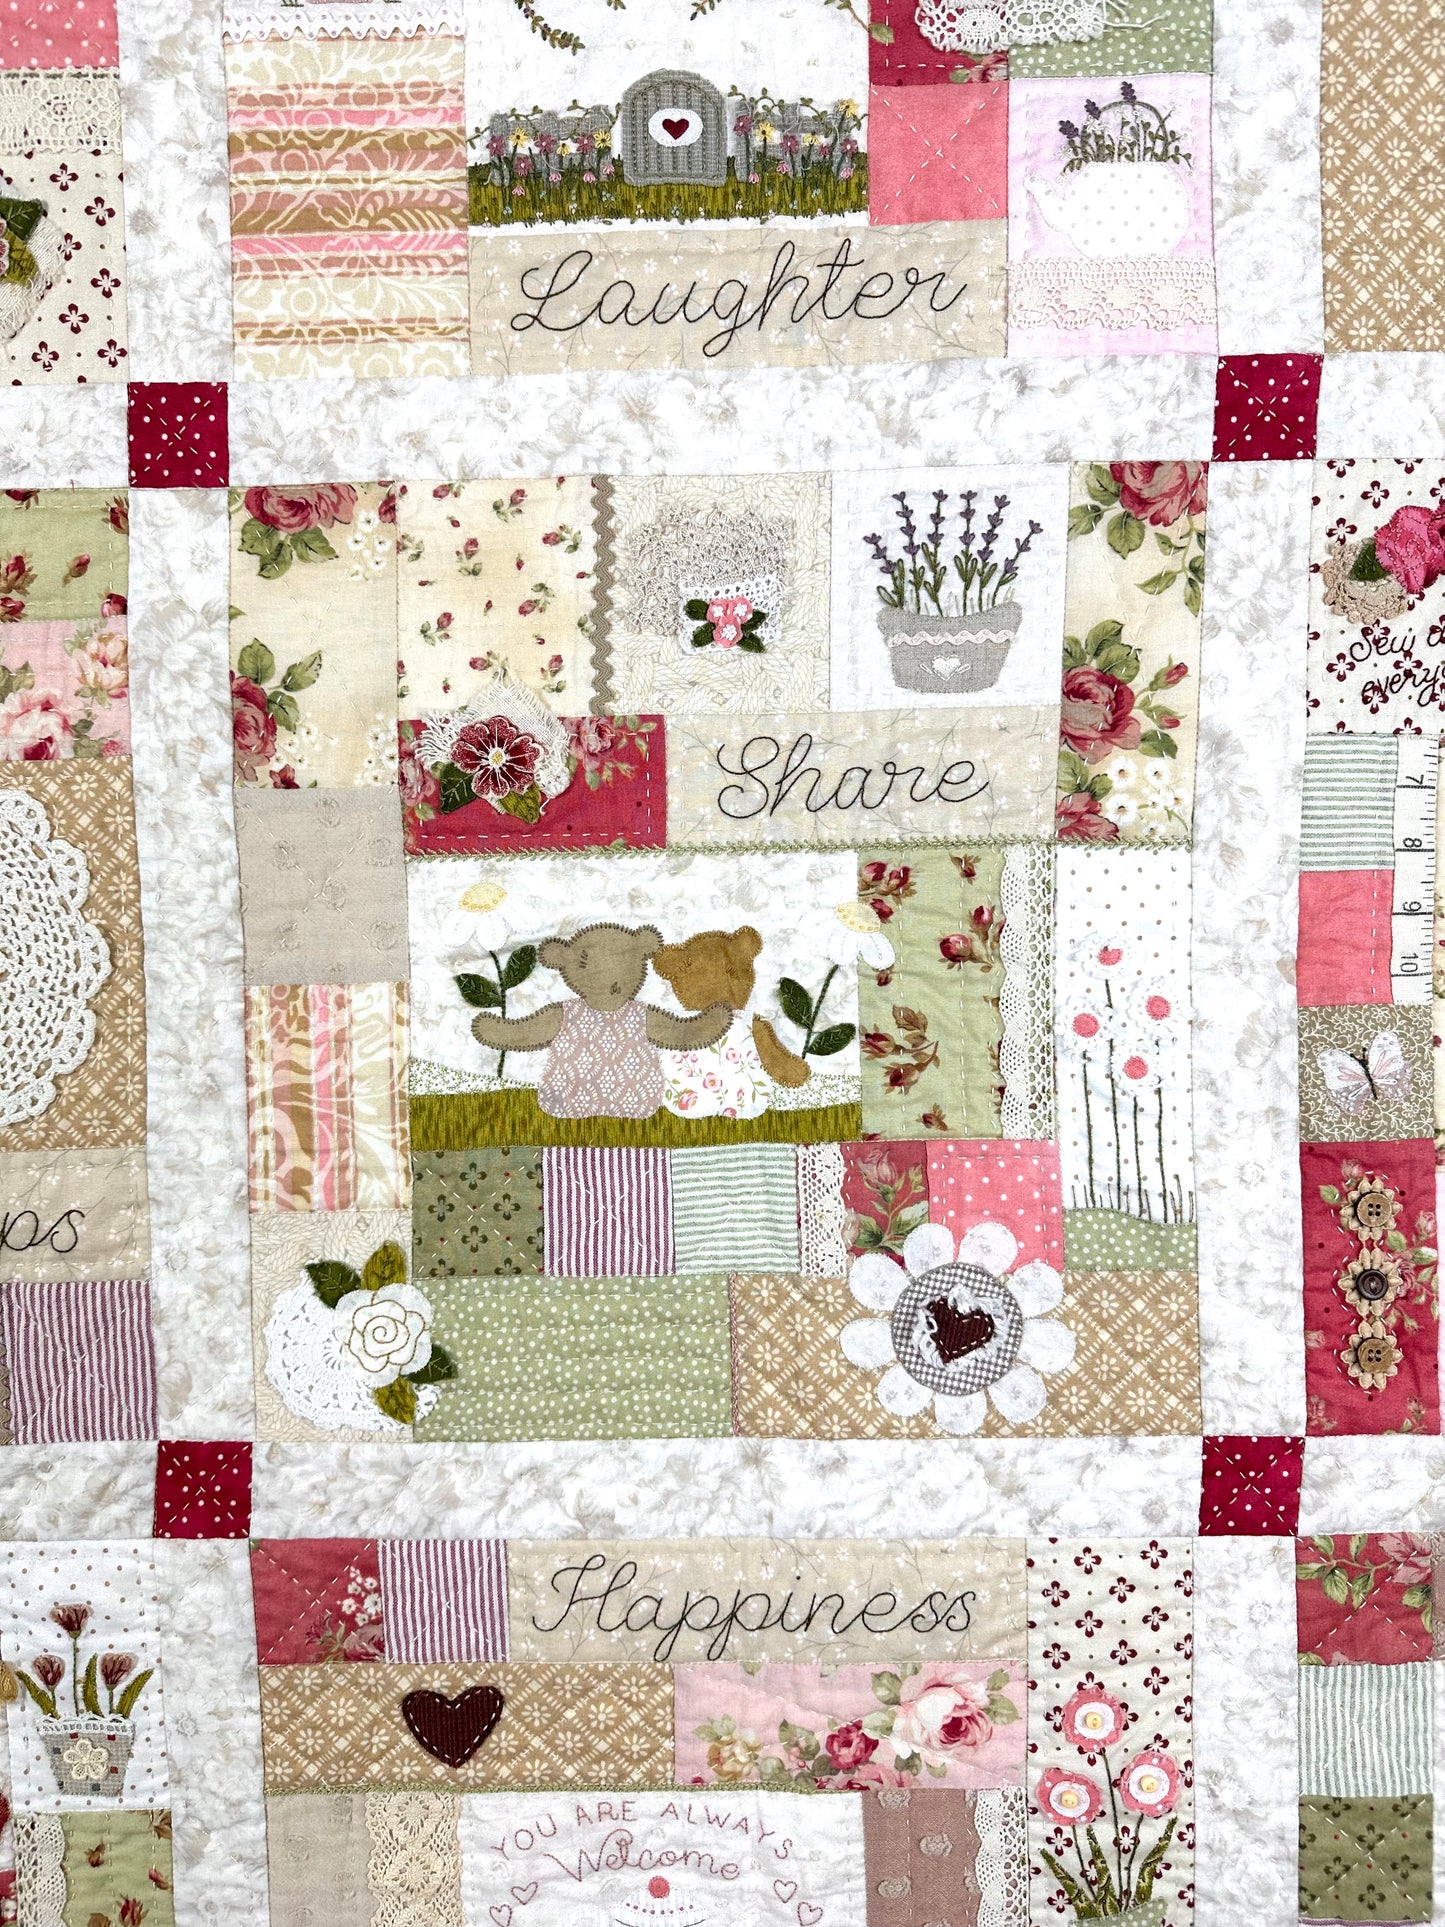 Friendship Quilt (new colours) - full kit with applique fabrics and embellishments